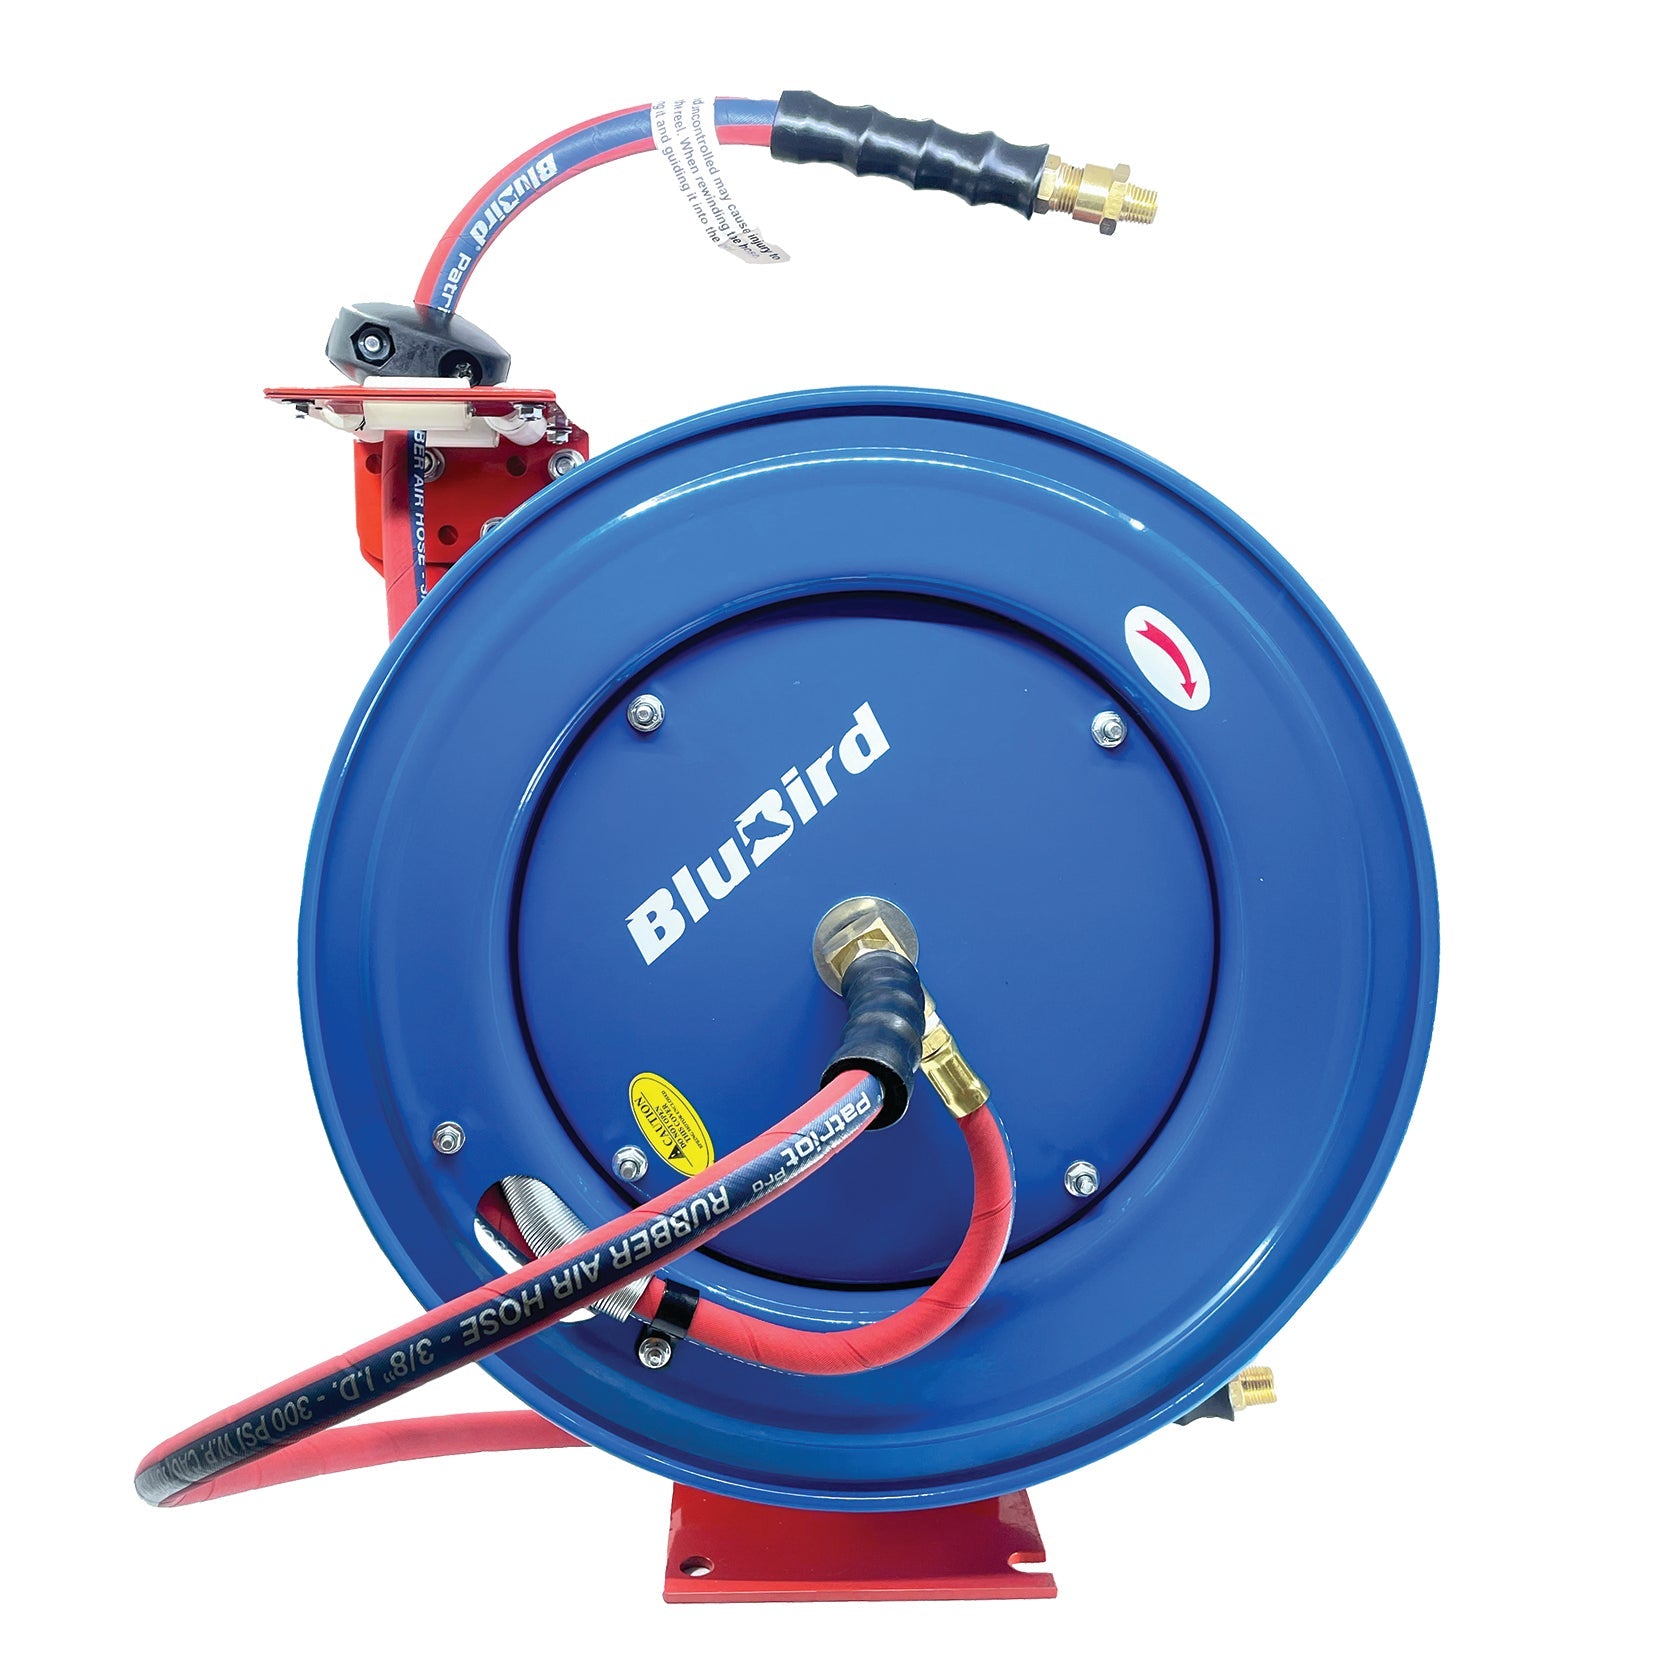 BluBird Patriot Pro Air Hose Reel 1/2" x 50' Retractable Heavy Duty Steel Construction with Rubber Hose 300 PSI